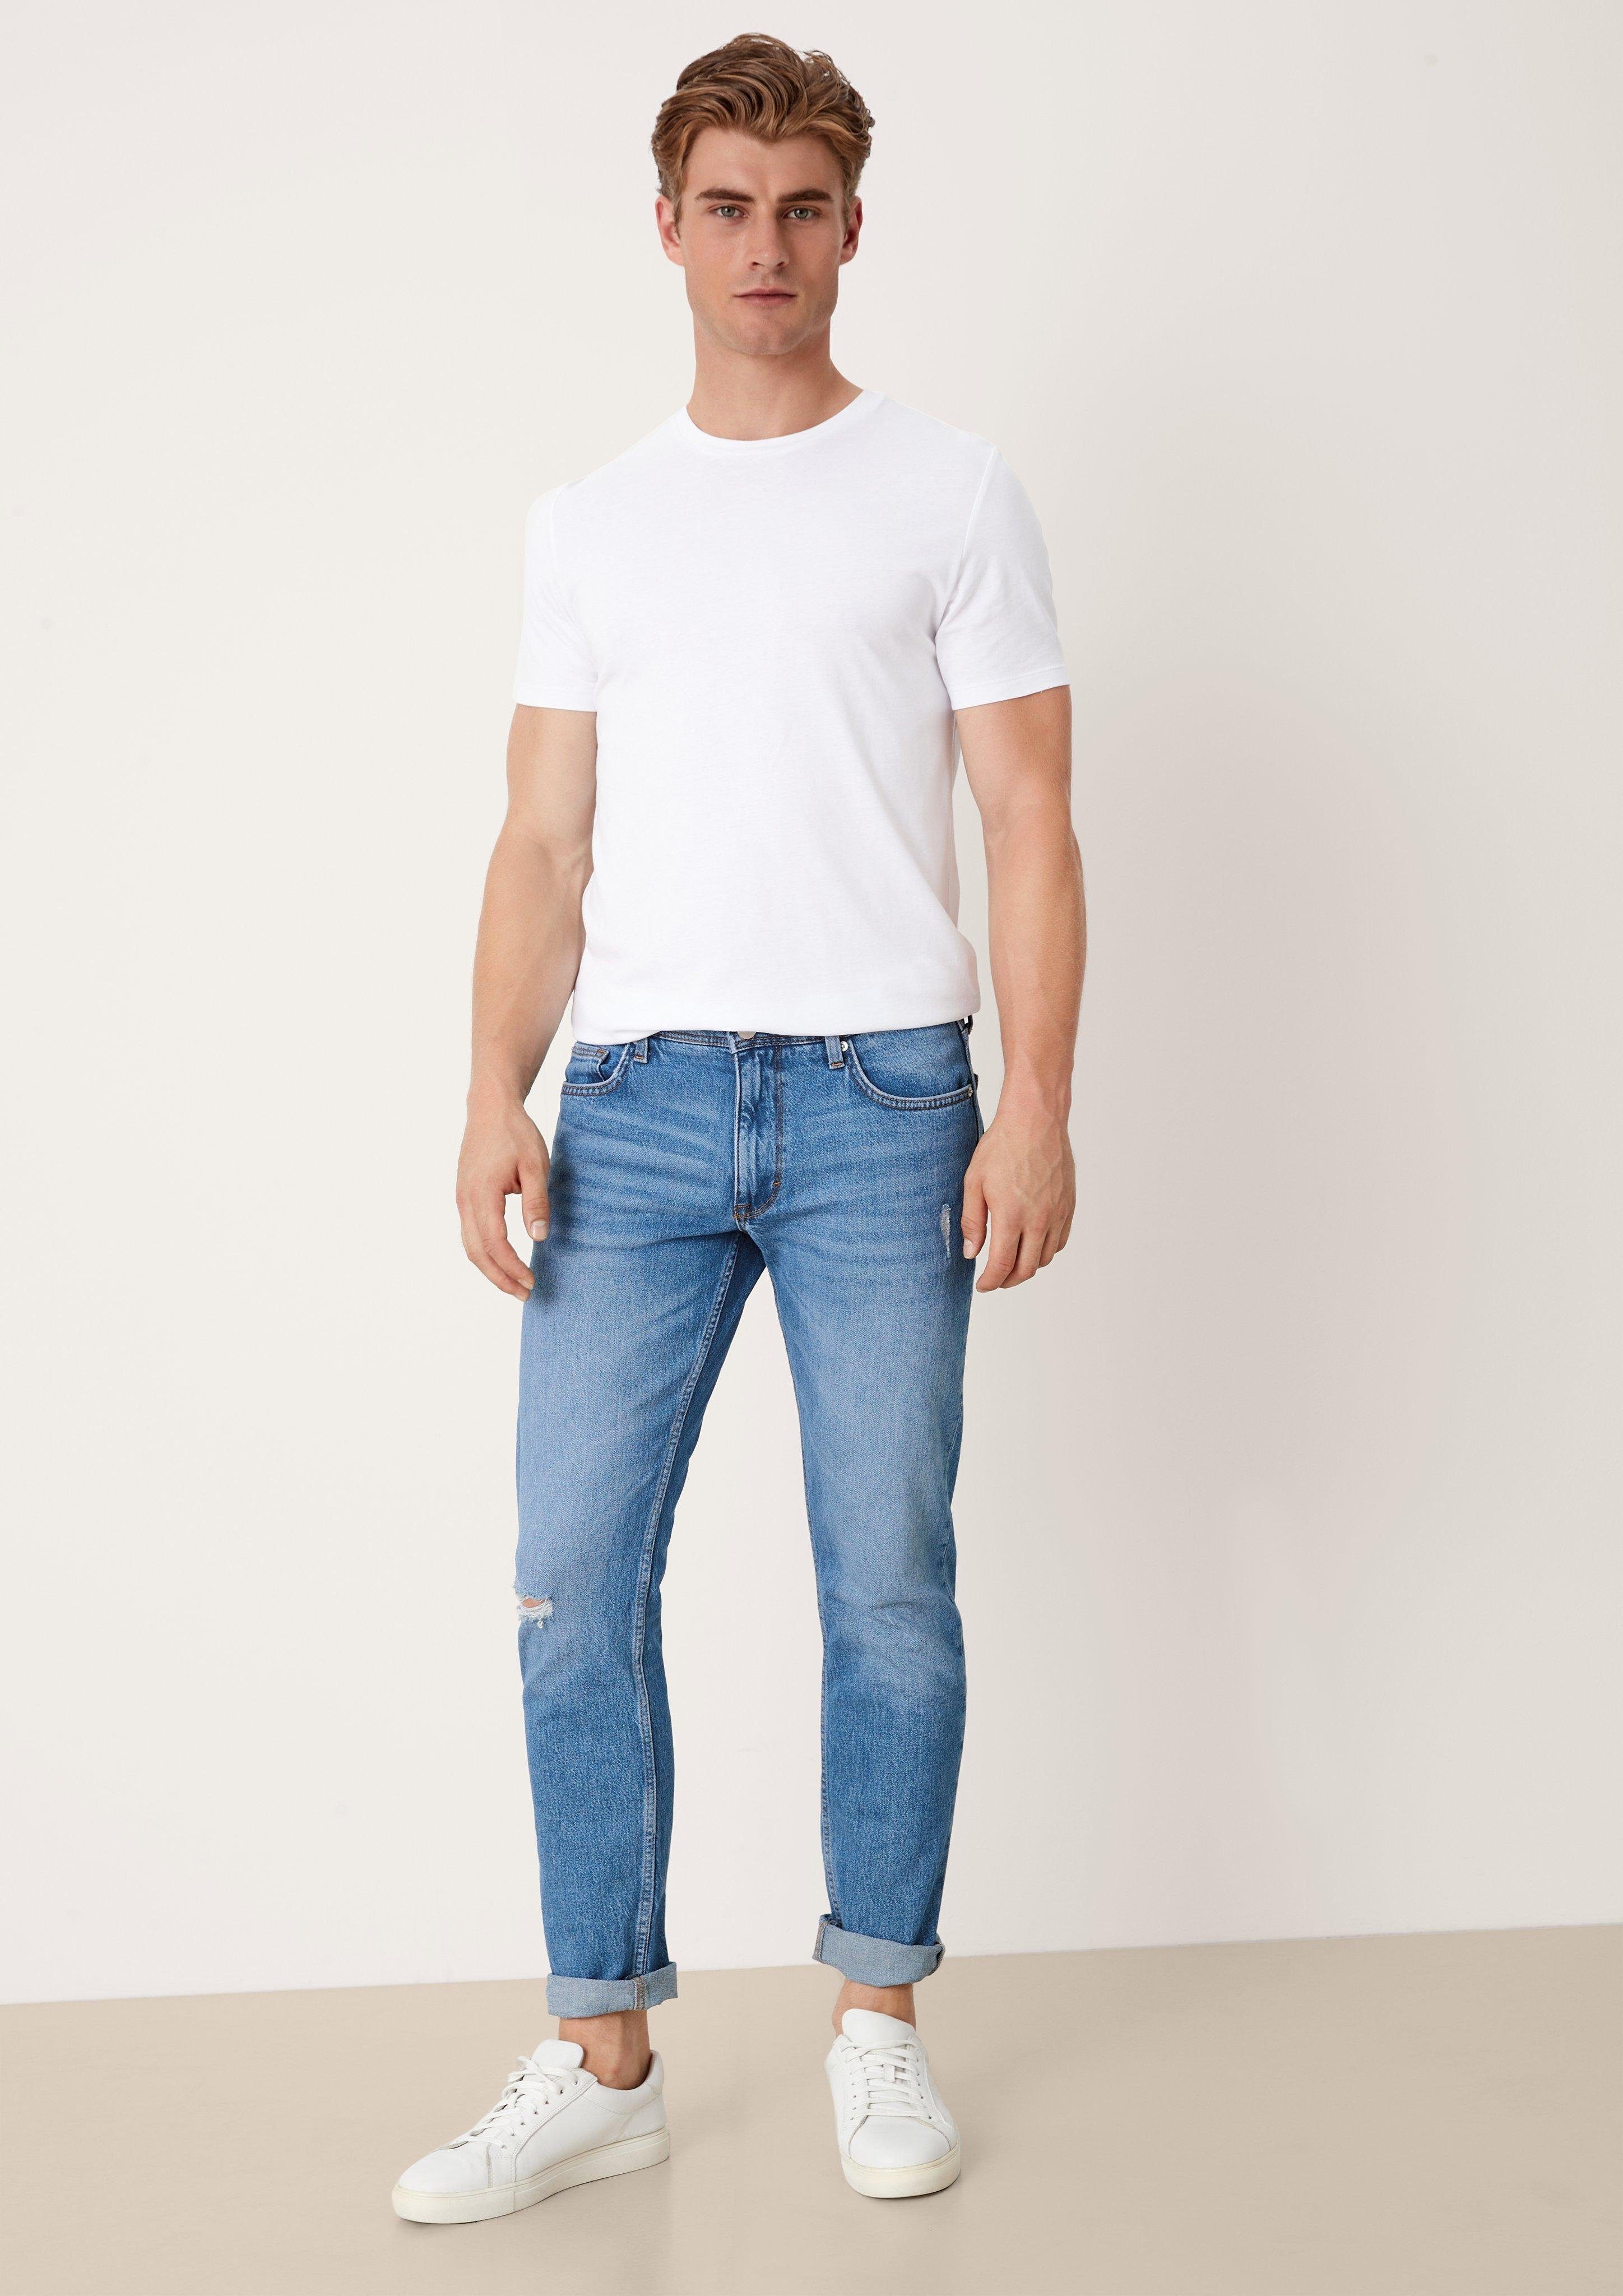 s.Oliver Stoffhose Jeans York / Regular Fit / Mid Rise / Straight Leg Waschung, Destroyes, Label-Patch ozeanblau